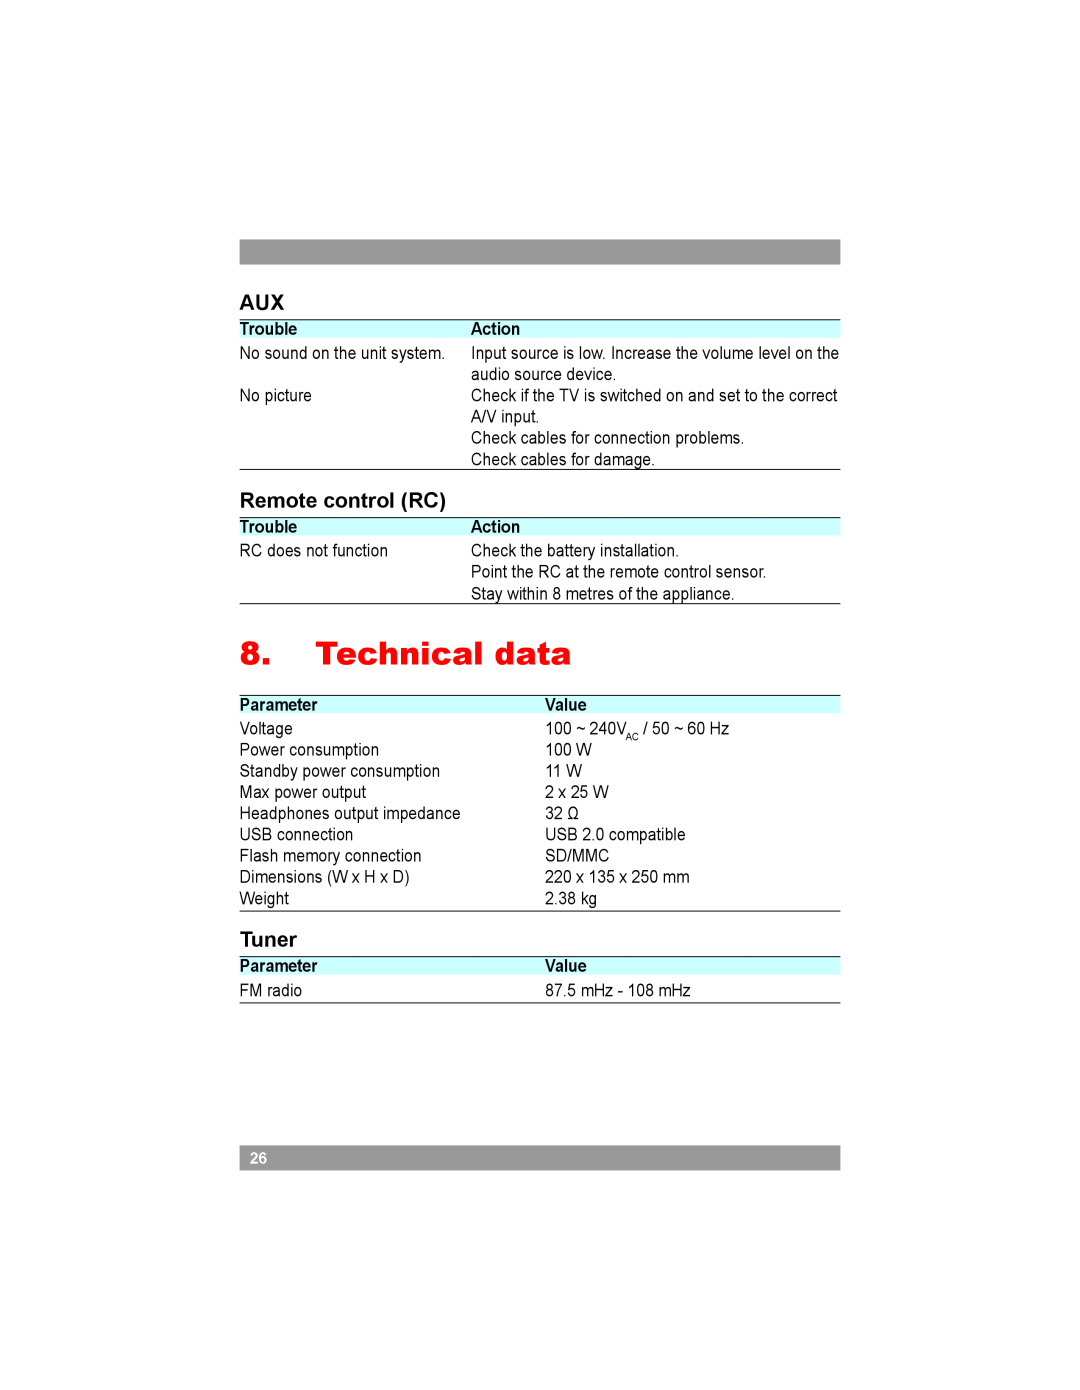 Akai AMD20 manual Technical data, Trouble, Action, Parameter, Value, FM radio, mHz - 108 mHz 